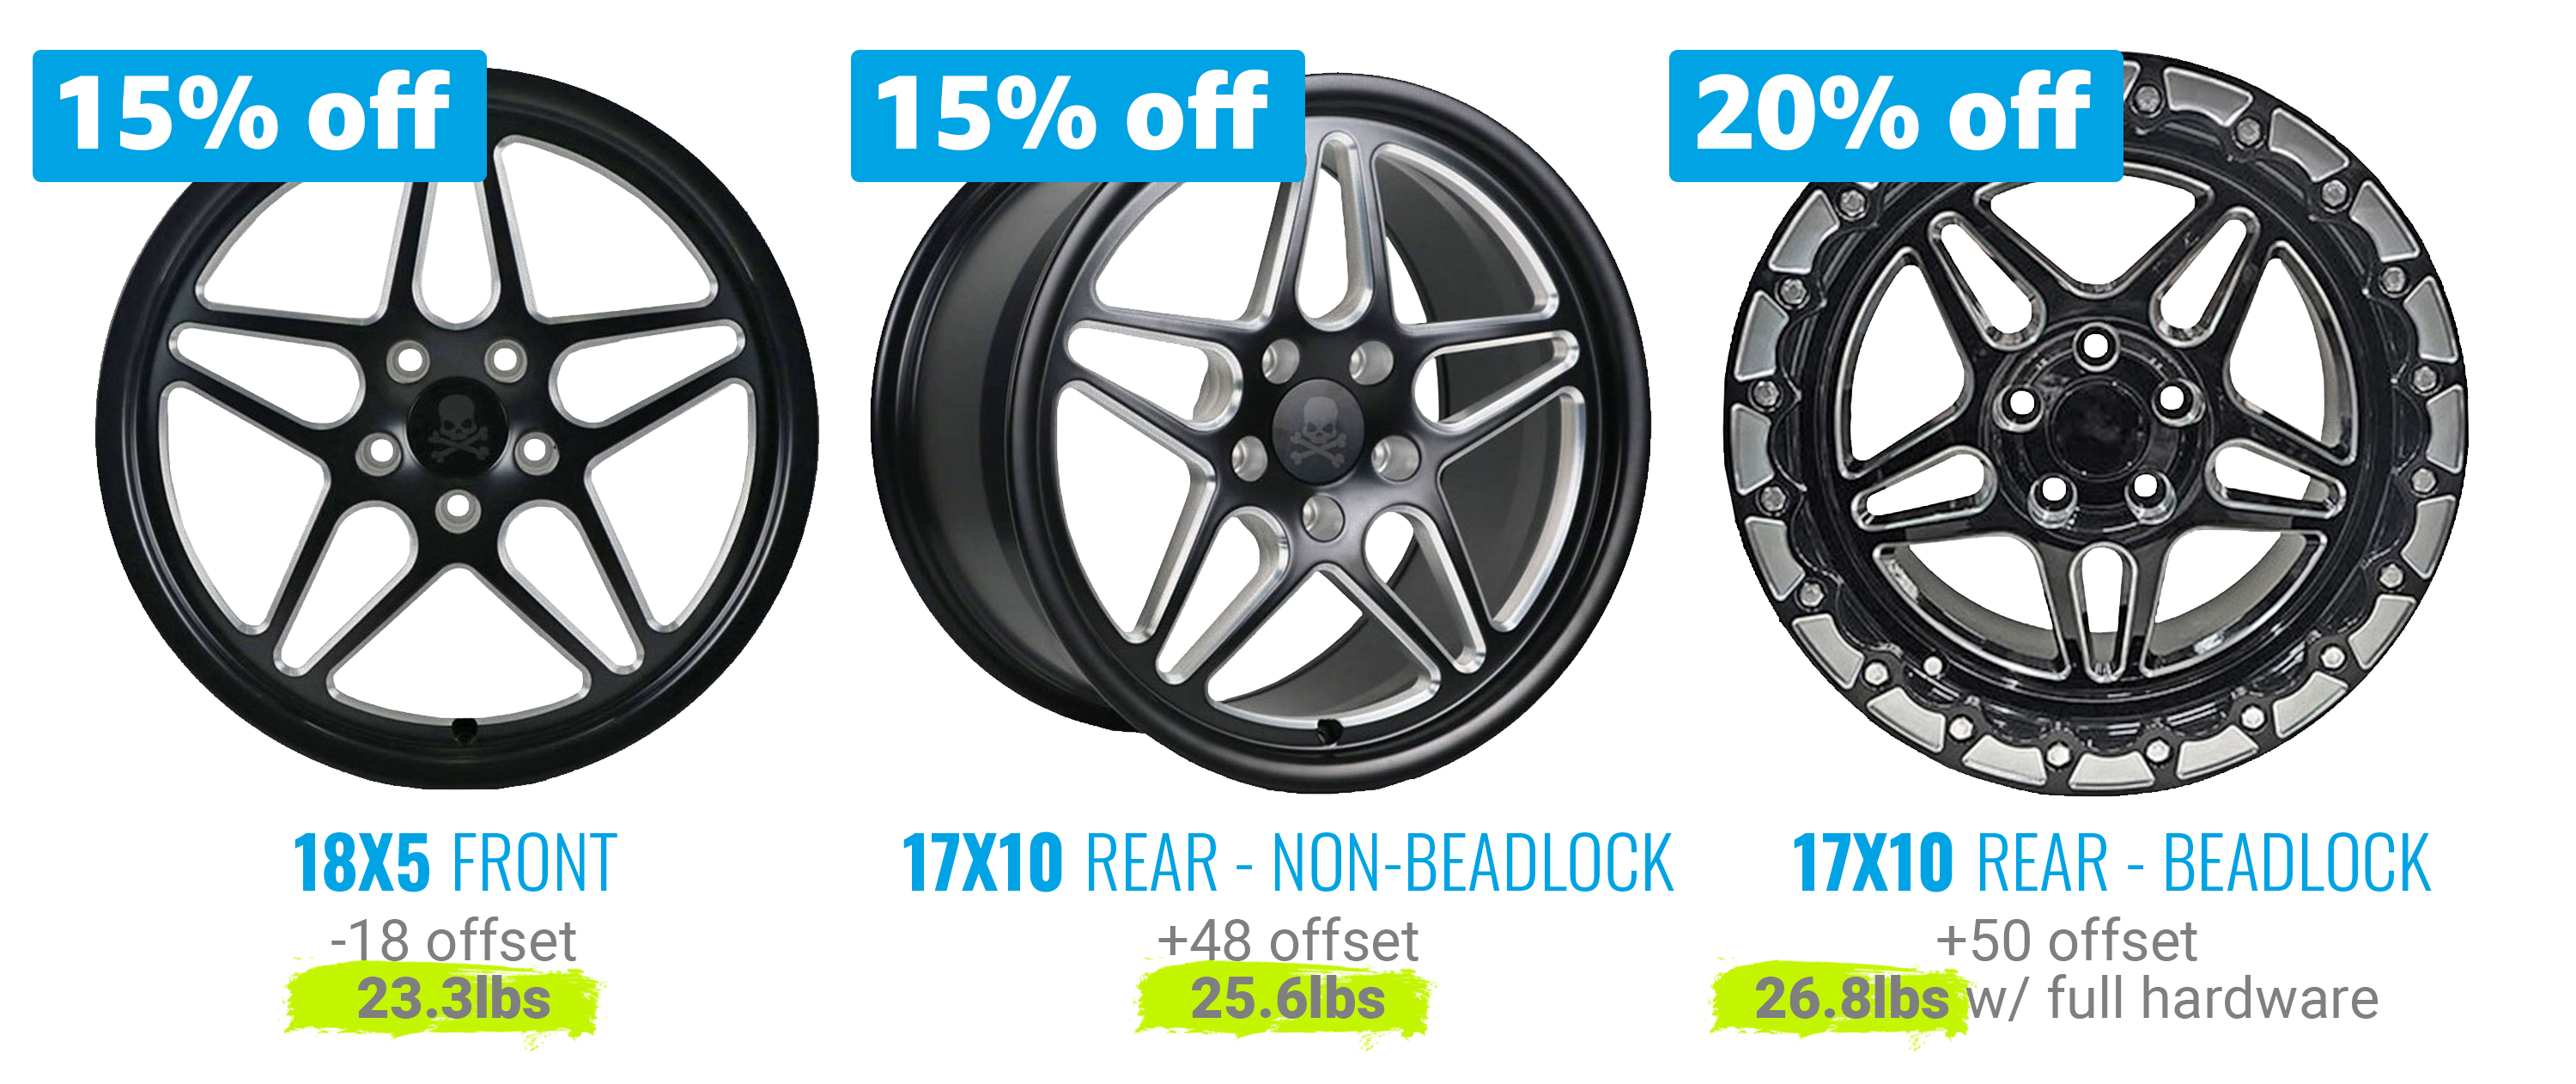 Up to 20% off LPS5 Drag Wheels at Lethal Performance